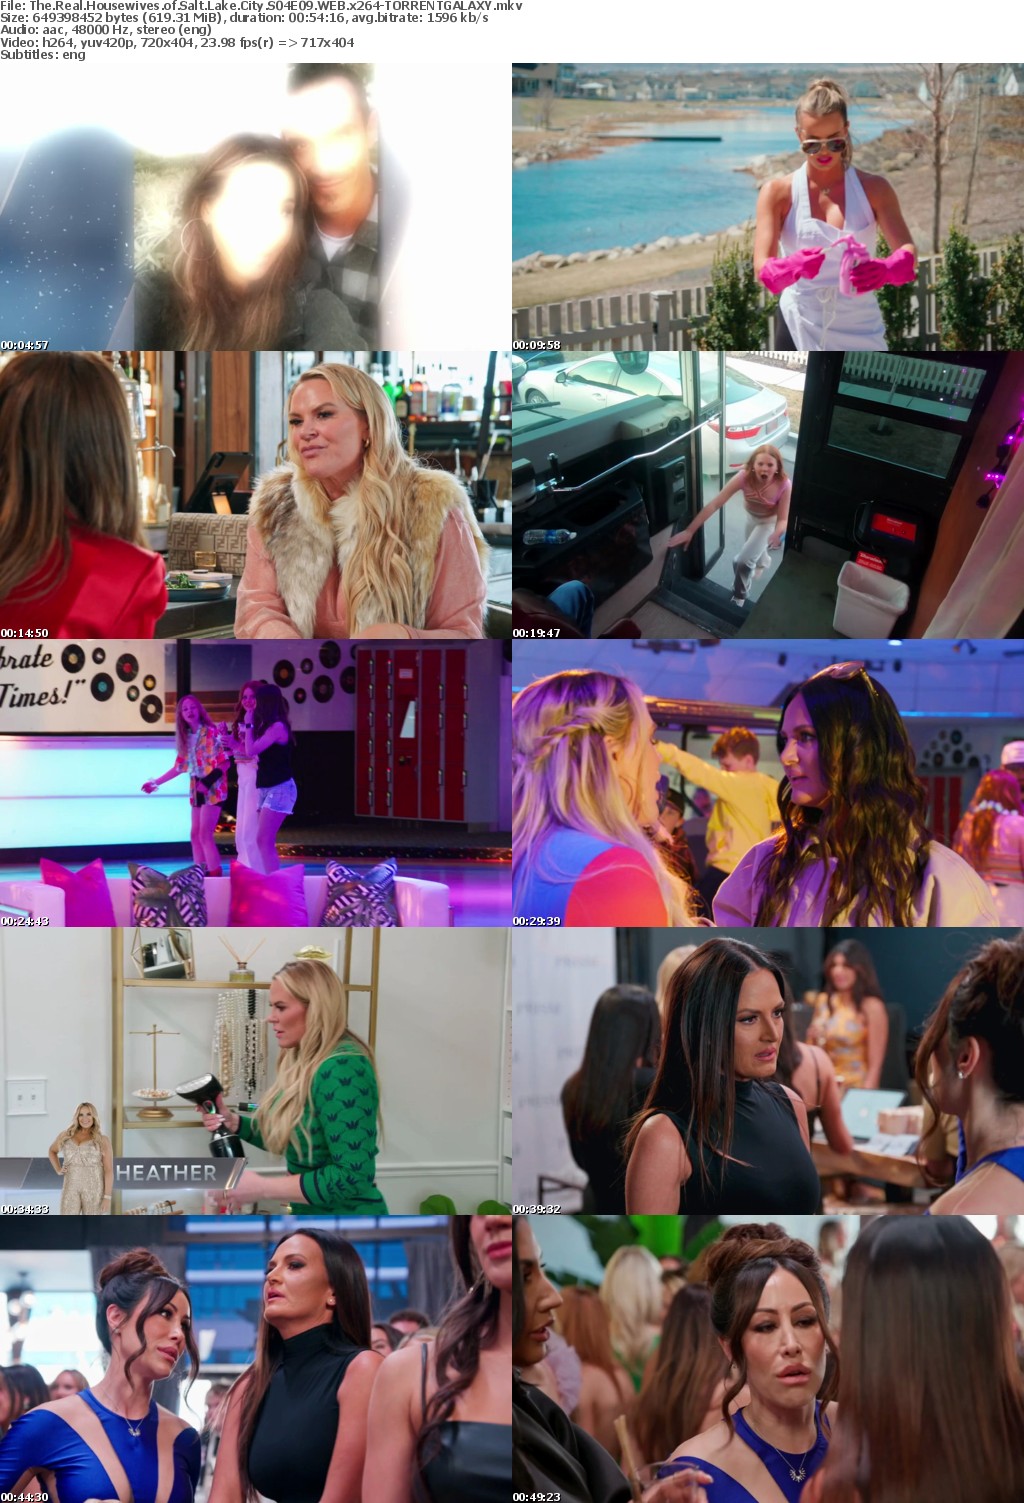 The Real Housewives of Salt Lake City S04E09 WEB x264-GALAXY